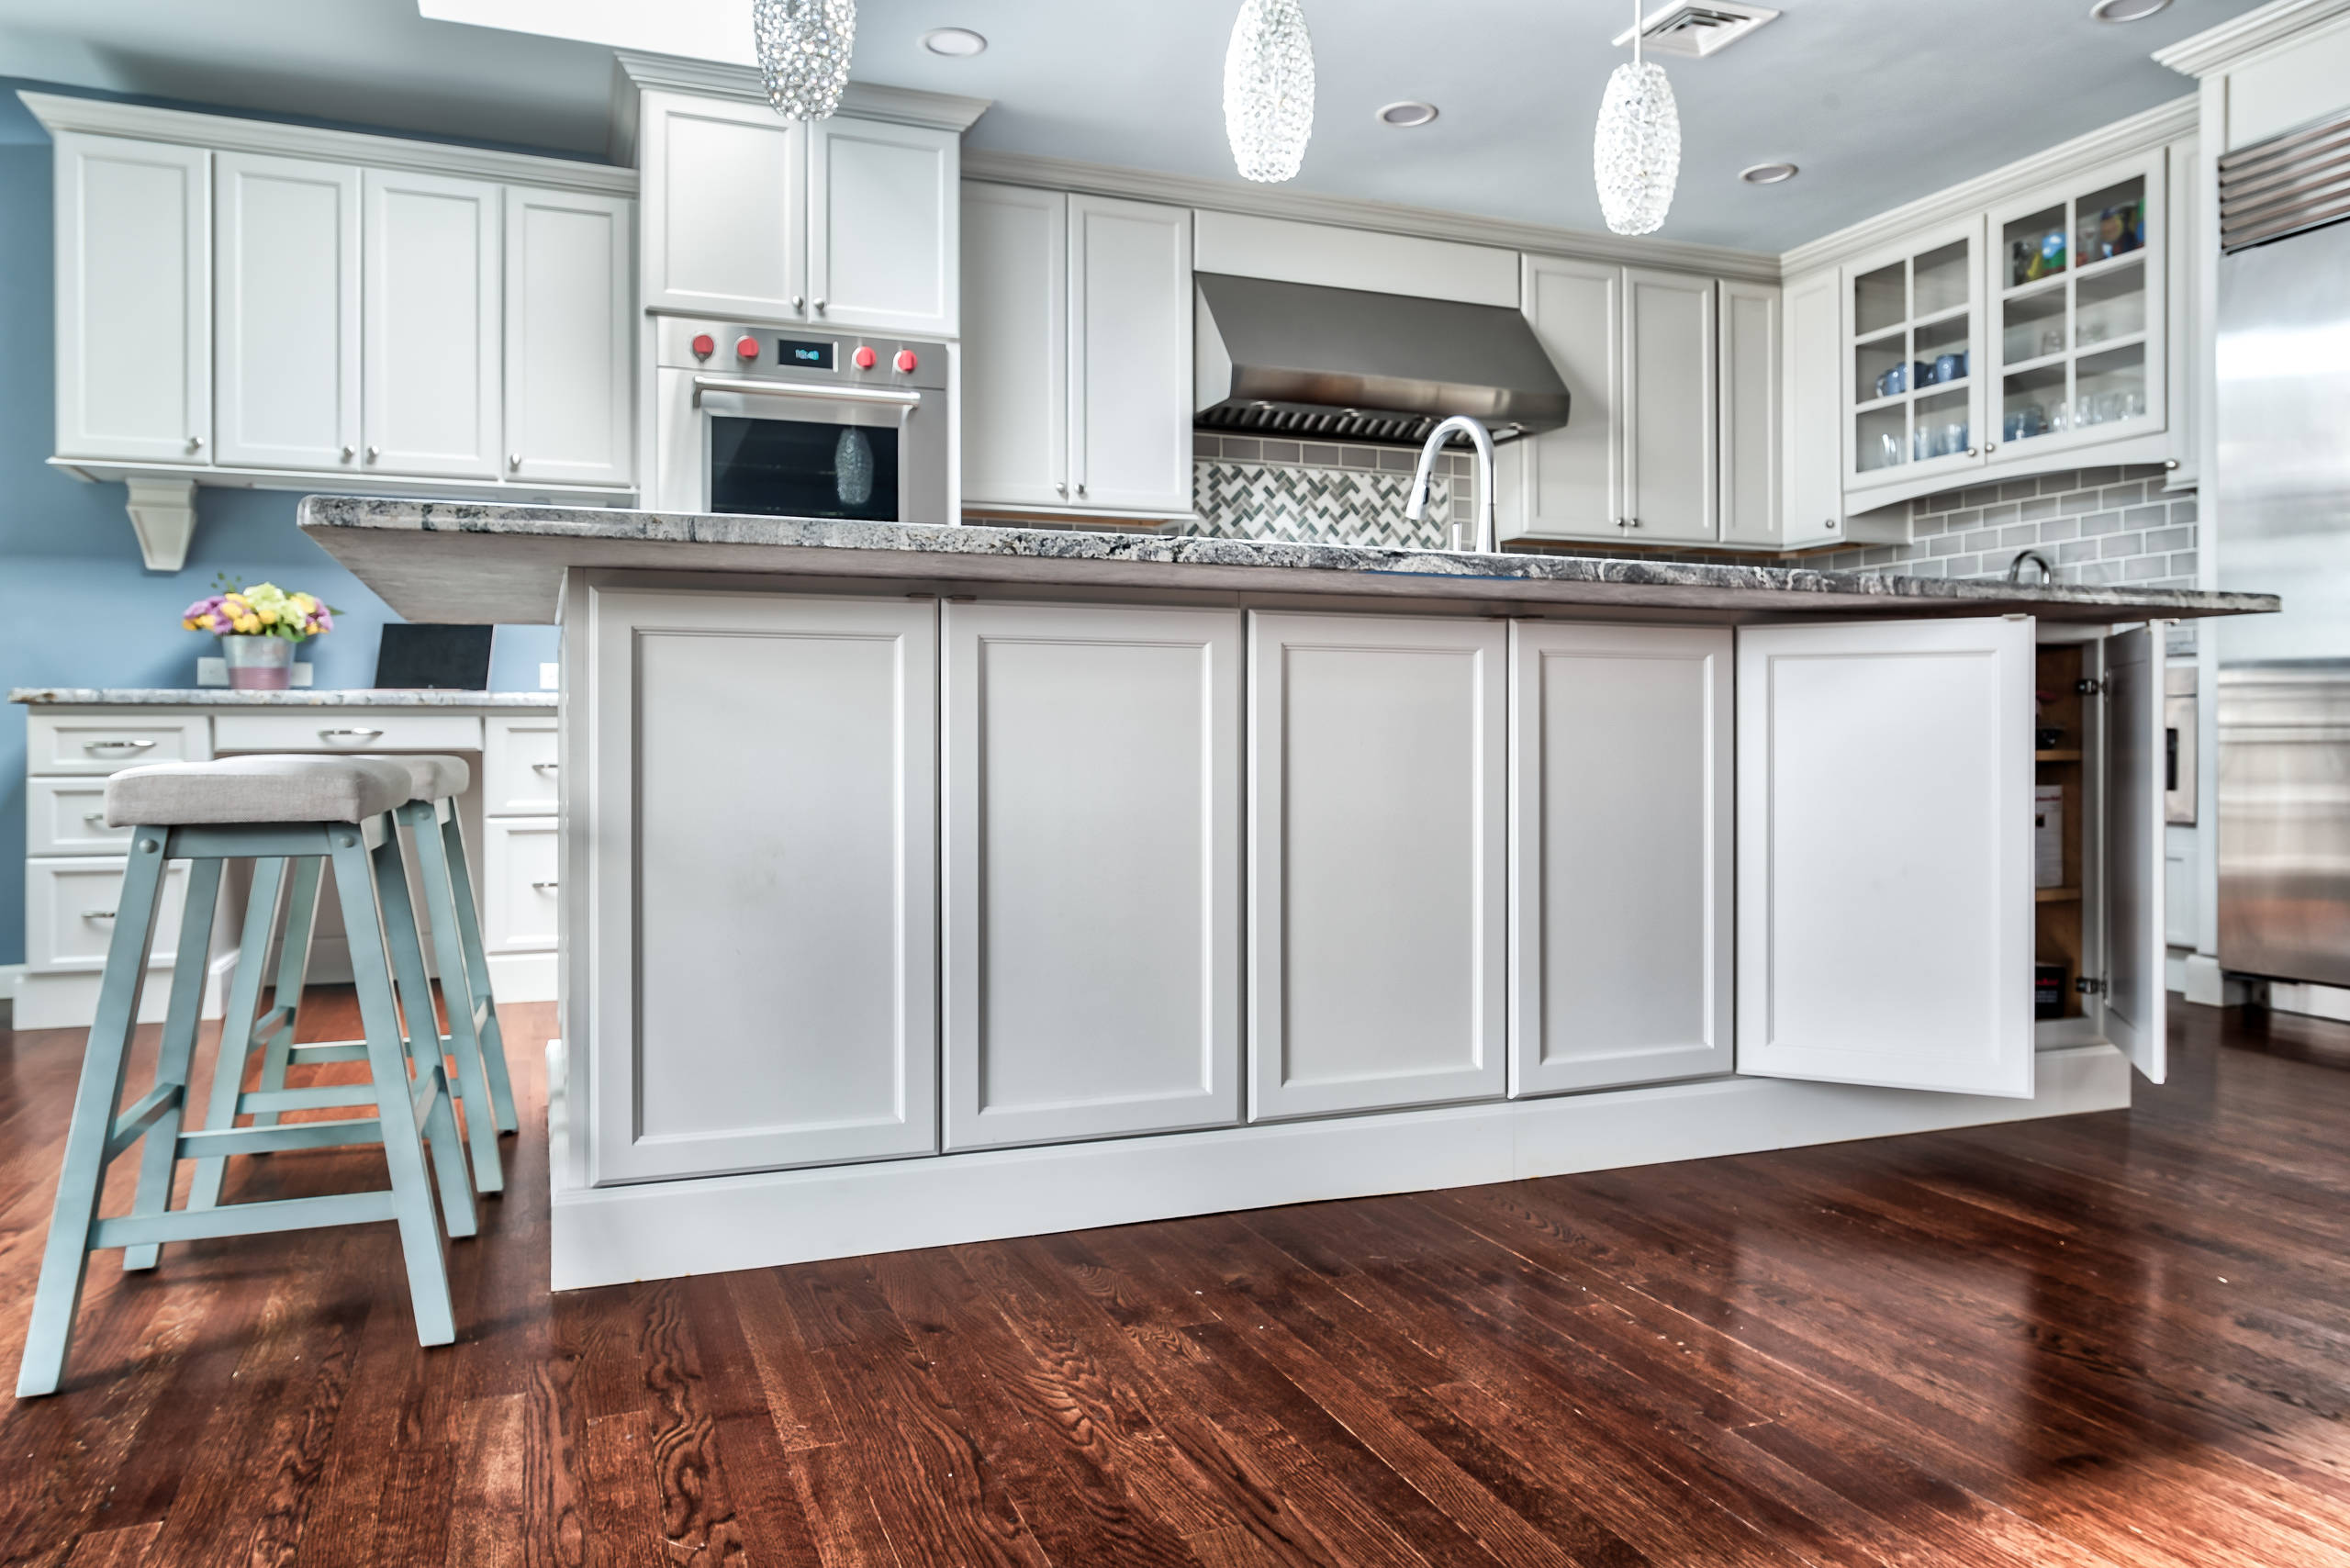 Kitchen Island with Hidden Cabinets Storage to Maximize Space